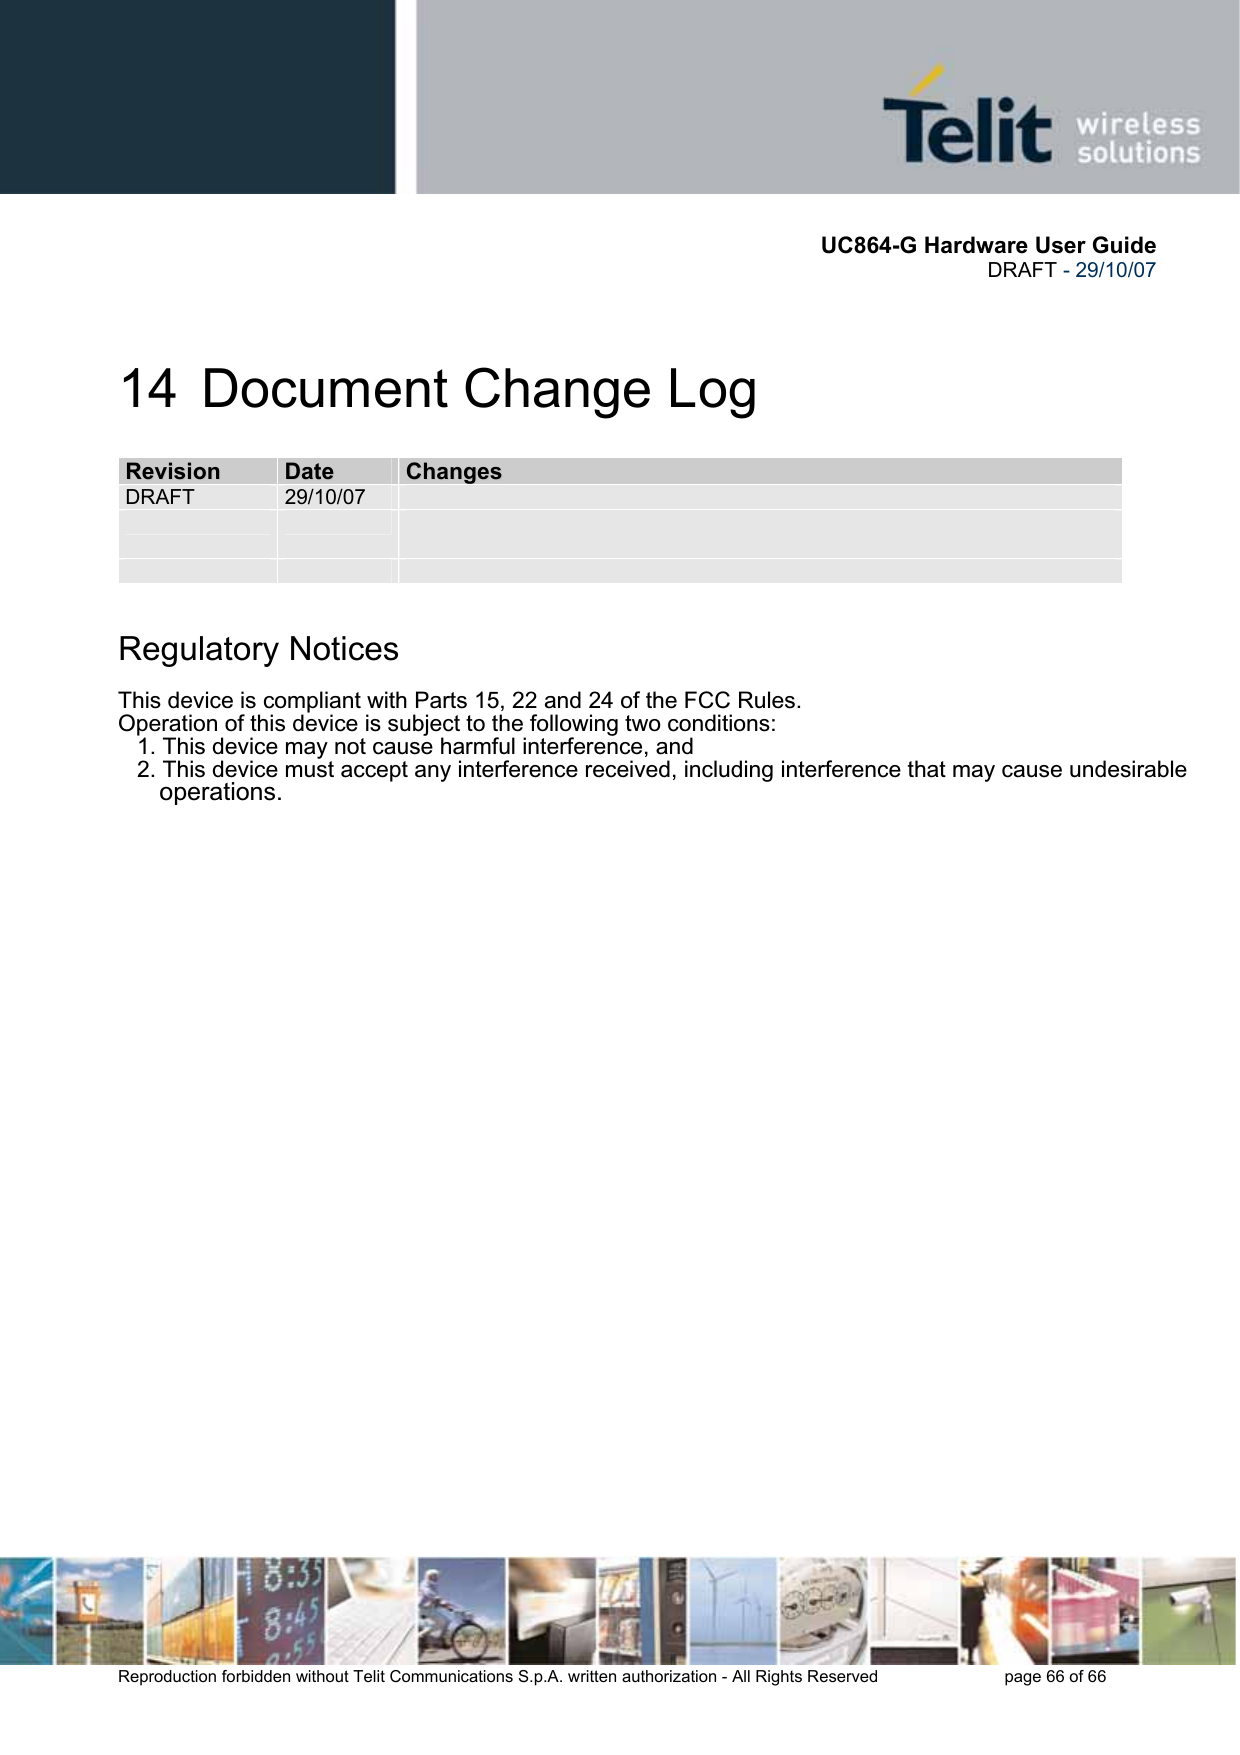       UC864-G Hardware User Guide  DRAFT - 29/10/07      Reproduction forbidden without Telit Communications S.p.A. written authorization - All Rights Reserved    page 66 of 66  14  Document Change Log RReevviissiioonn  DDaattee  CChhaannggeess  DRAFT  29/10/07                Regulatory Notices This device is compliant with Parts 15, 22 and 24 of the FCC Rules. Operation of this device is subject to the following two conditions:   1.This device may not cause harmful interference, and   2.This device must accept any interference received, including interference that may cause undesirable        operations.  